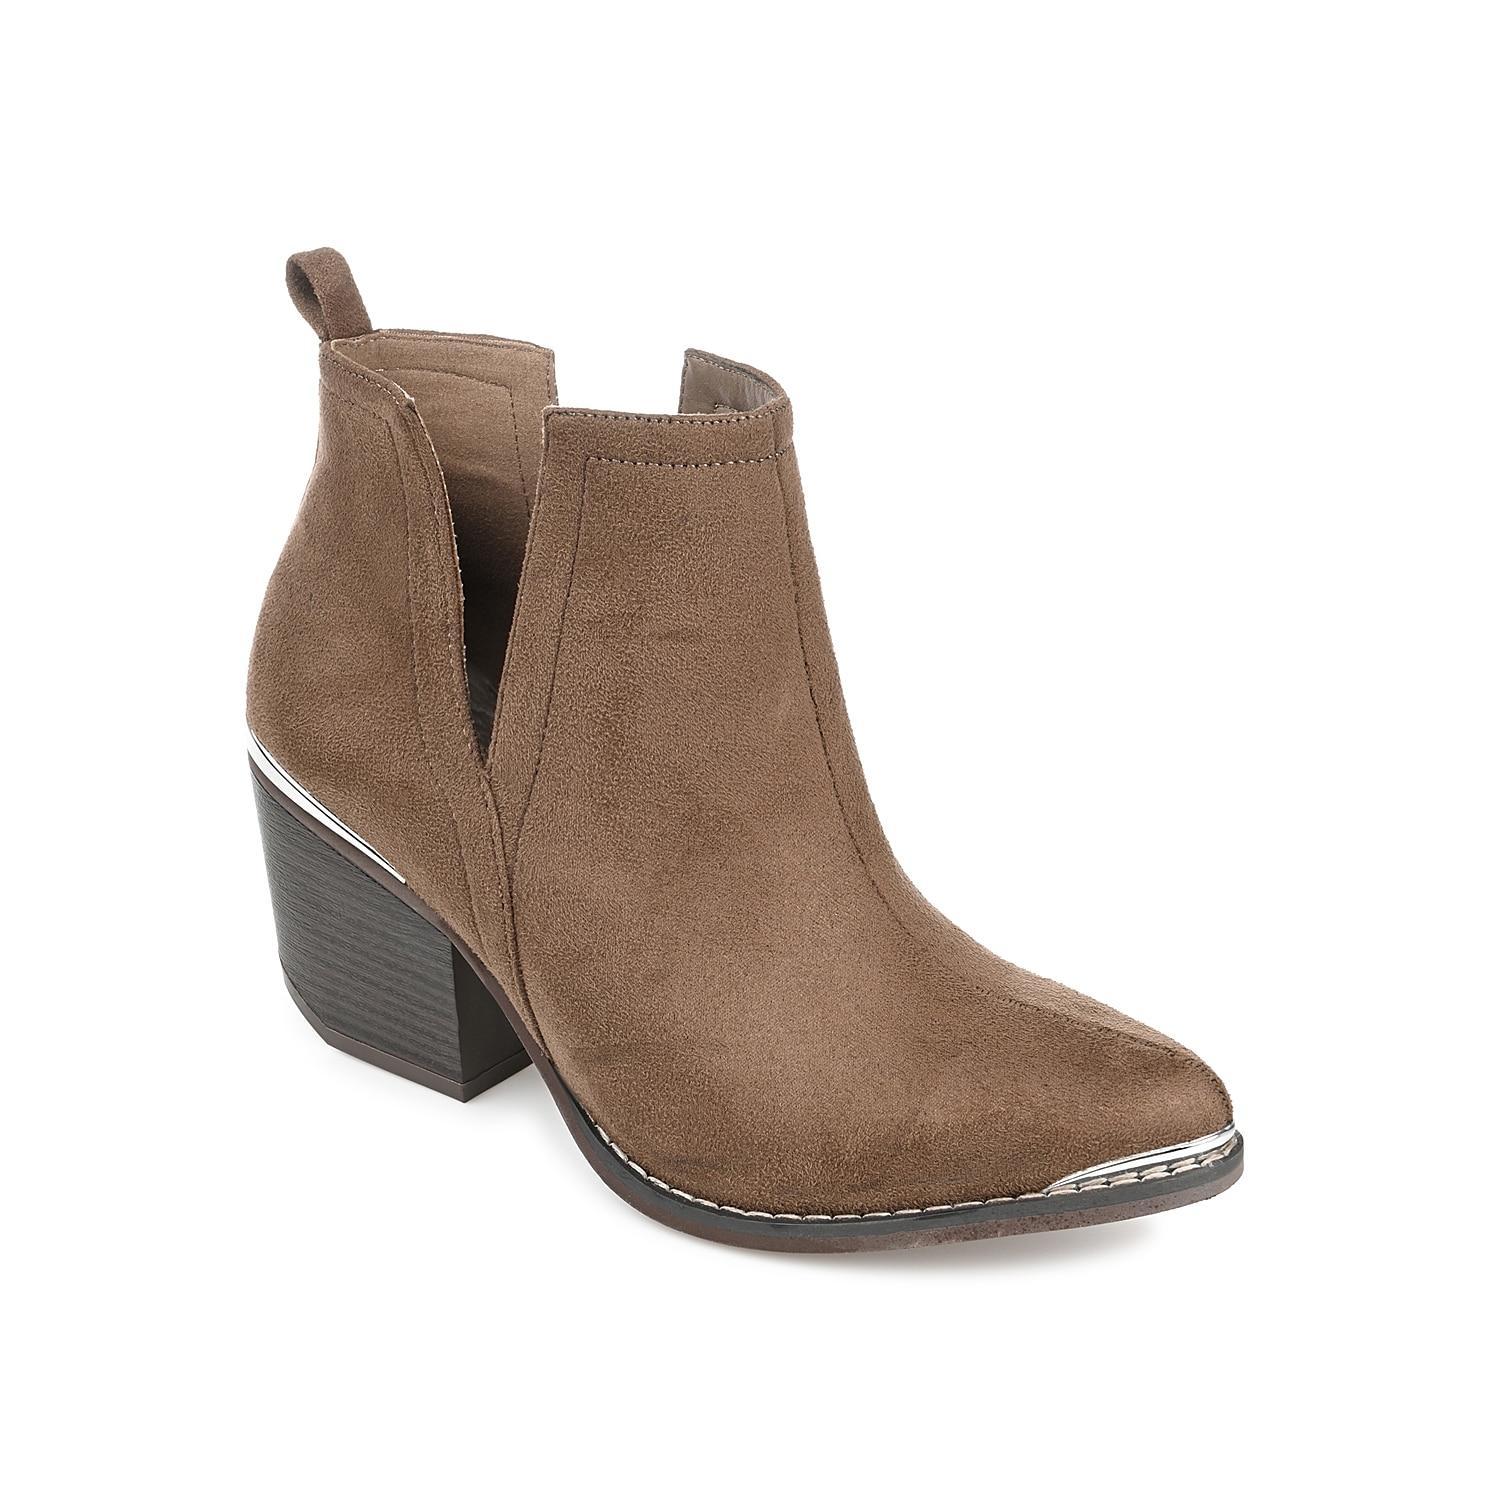 Journee Collection Issla Womens Ankle Boots Med Grey Product Image